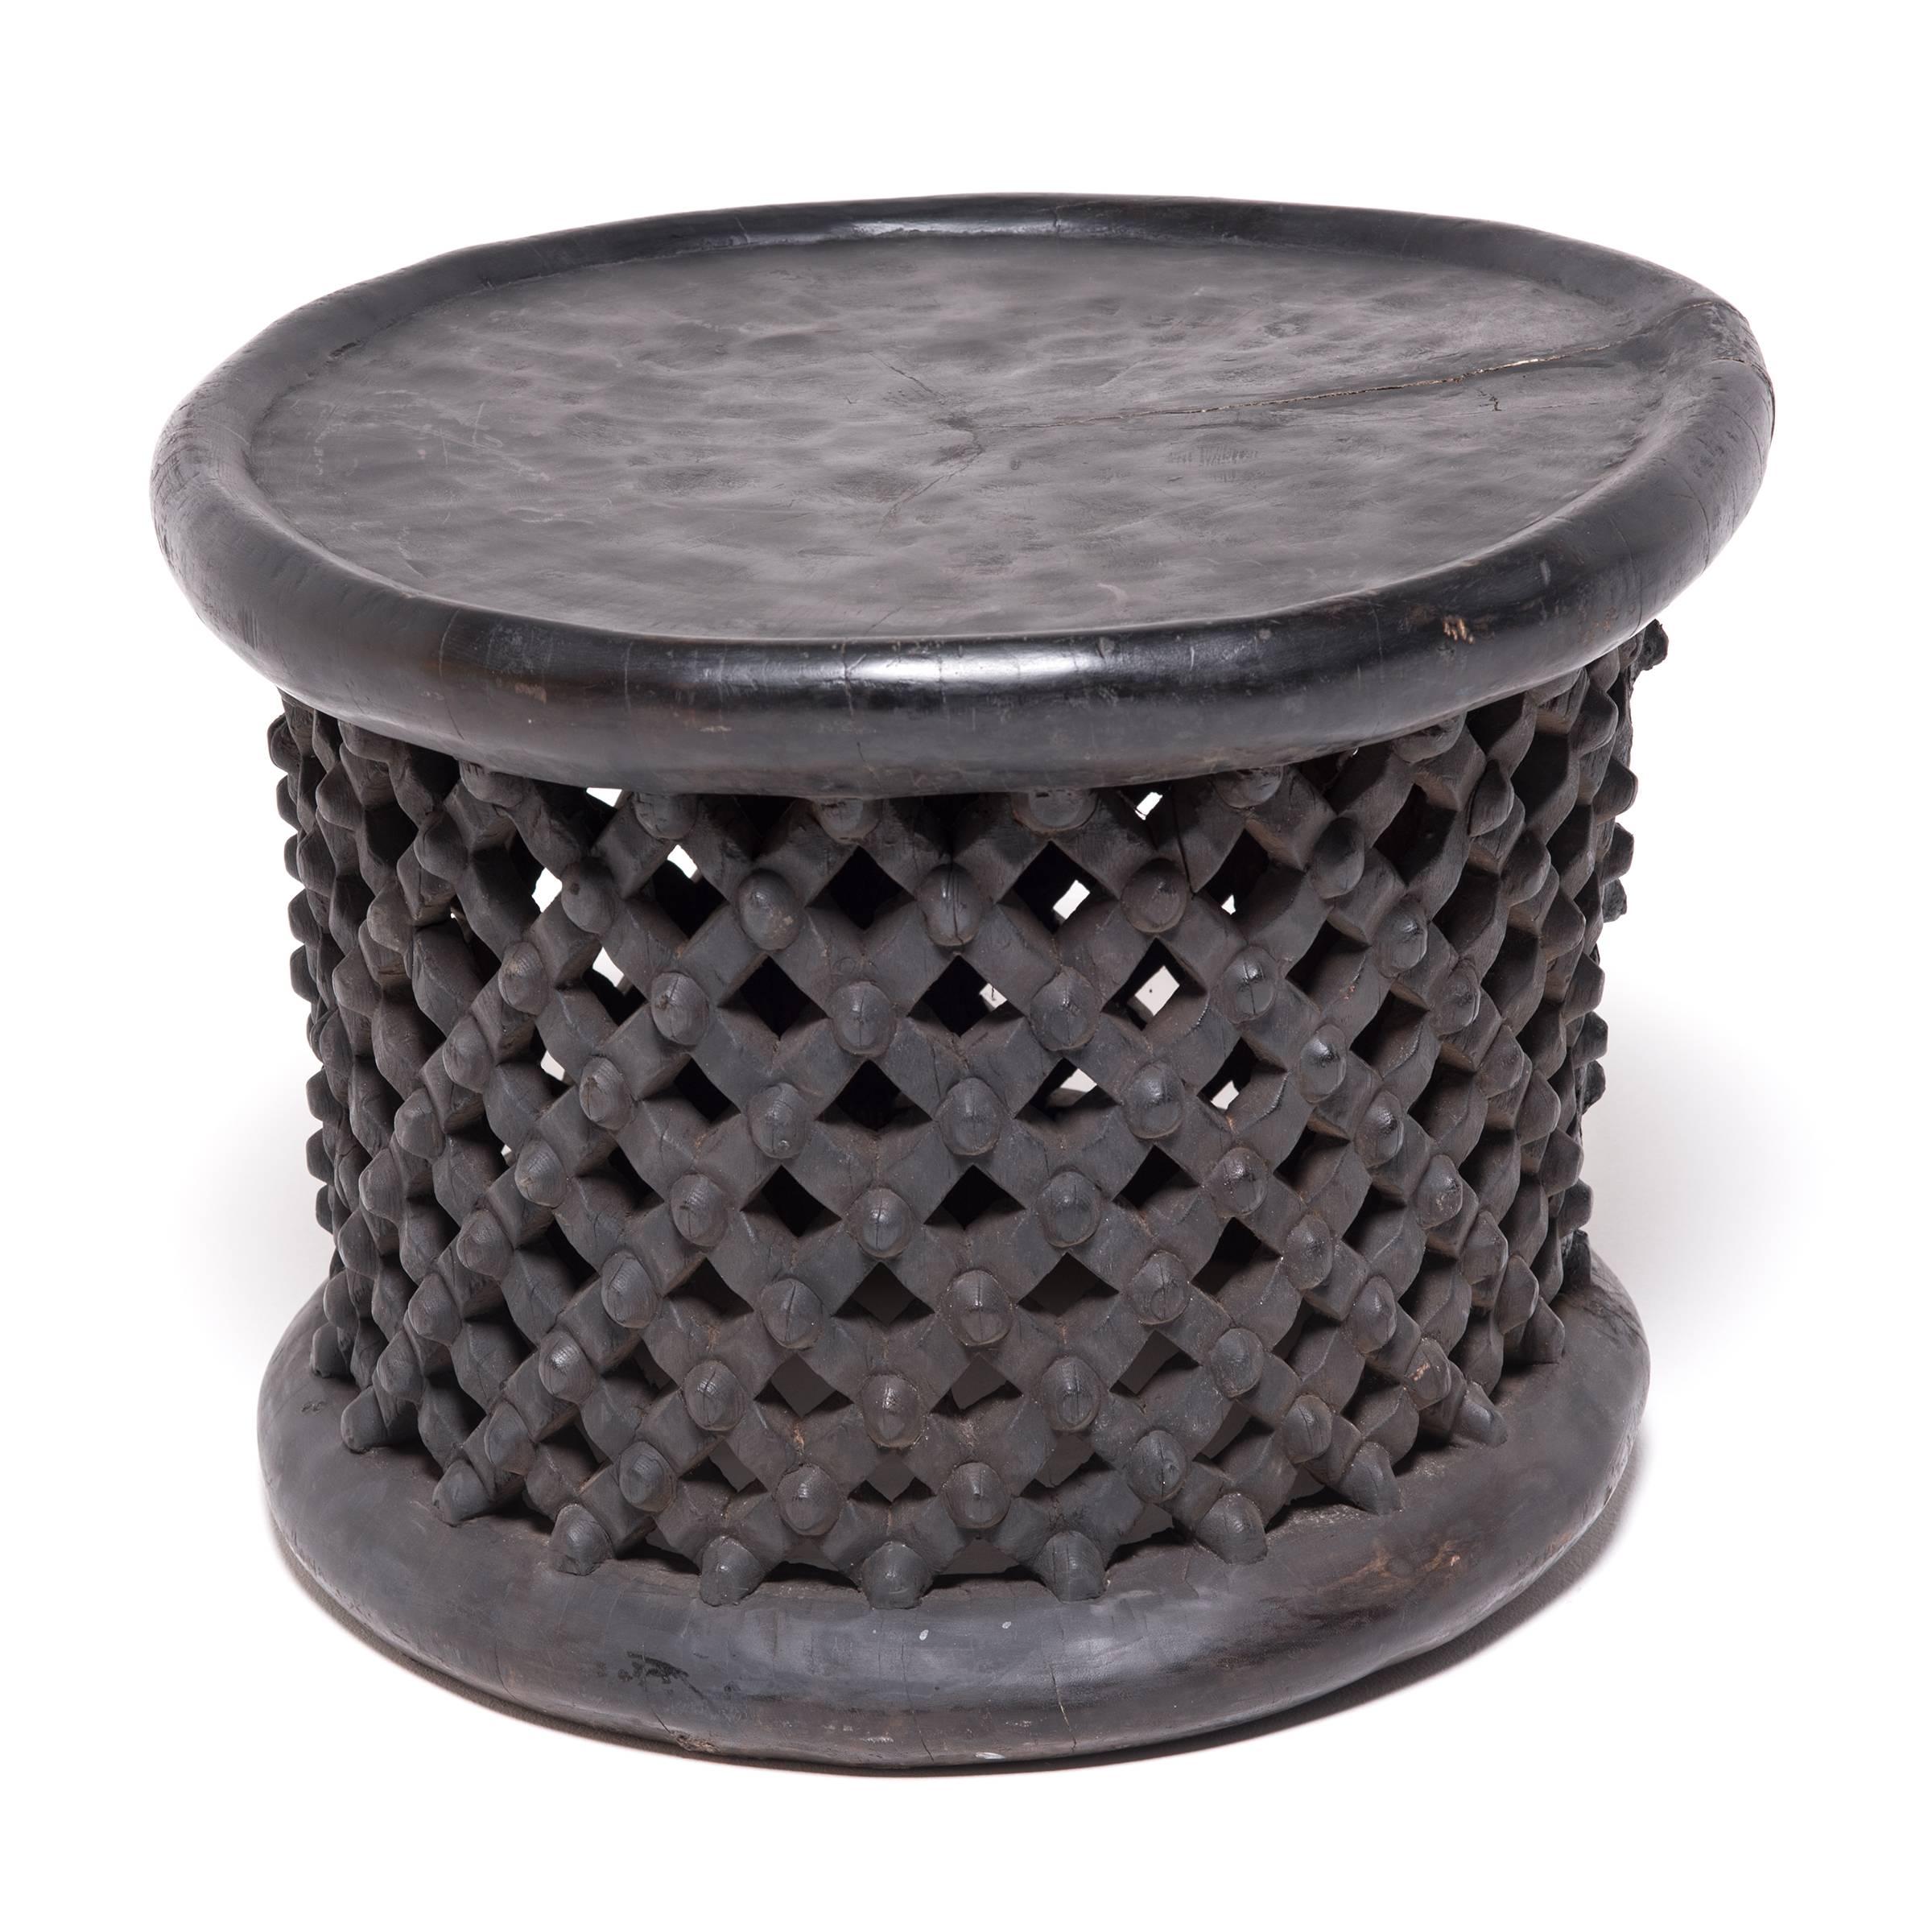 Carved from a single tree trunk, Bamileke lattice stools were used in Cameroon as symbolic seats in public ceremonies. The lattice webbing represents both the life cycle and the divine wisdom of the earth spider. A stool with broken lattice was